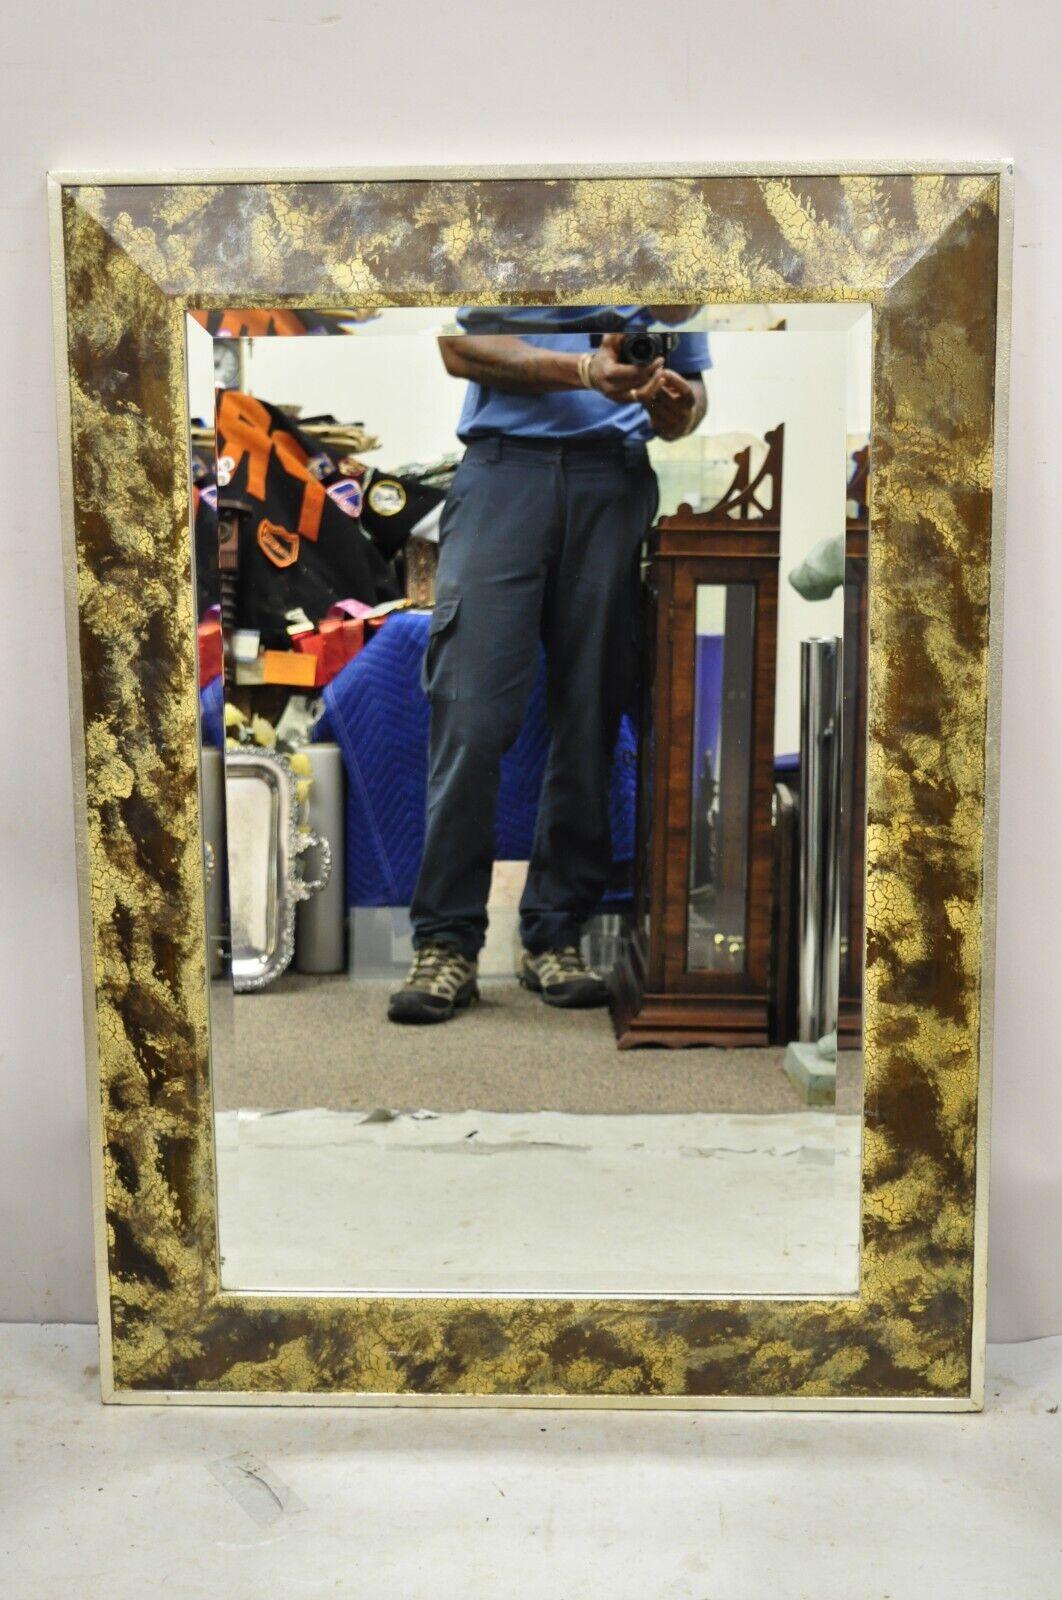 Decorative Arts Inc. Faux Tortoise Shell Painted Brown and Gold Modern Wood Frame Wall Mirror. Circa Late 20th Century.
Measurements: 33